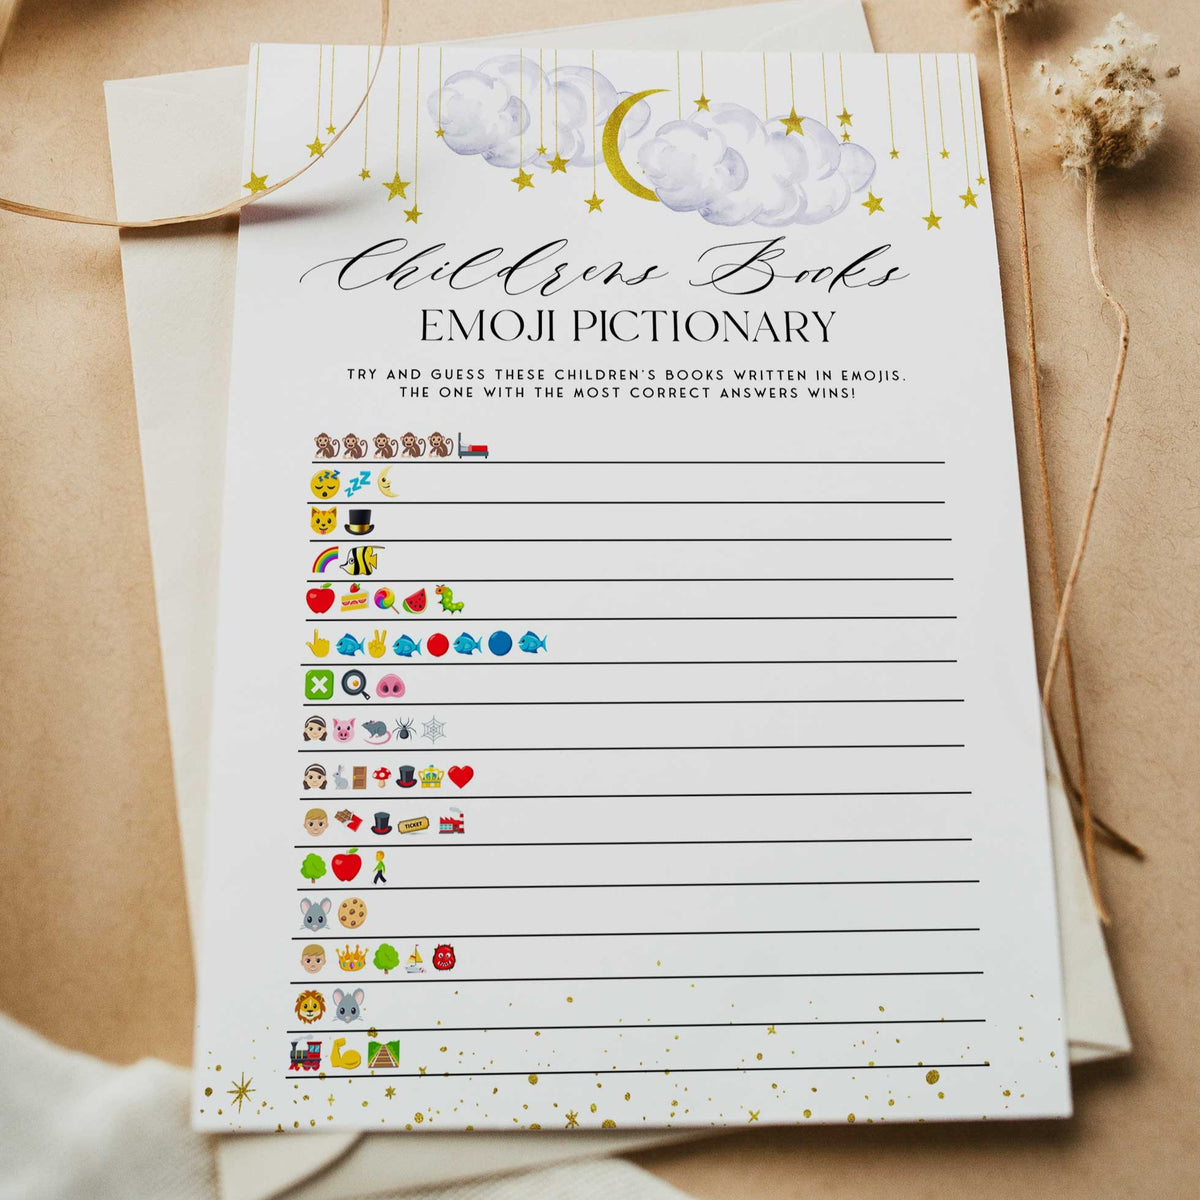 Fully editable and printable baby shower childrens books emoji pictionary game with a little star design. Perfect for a Twinkle Little Star baby shower themed party